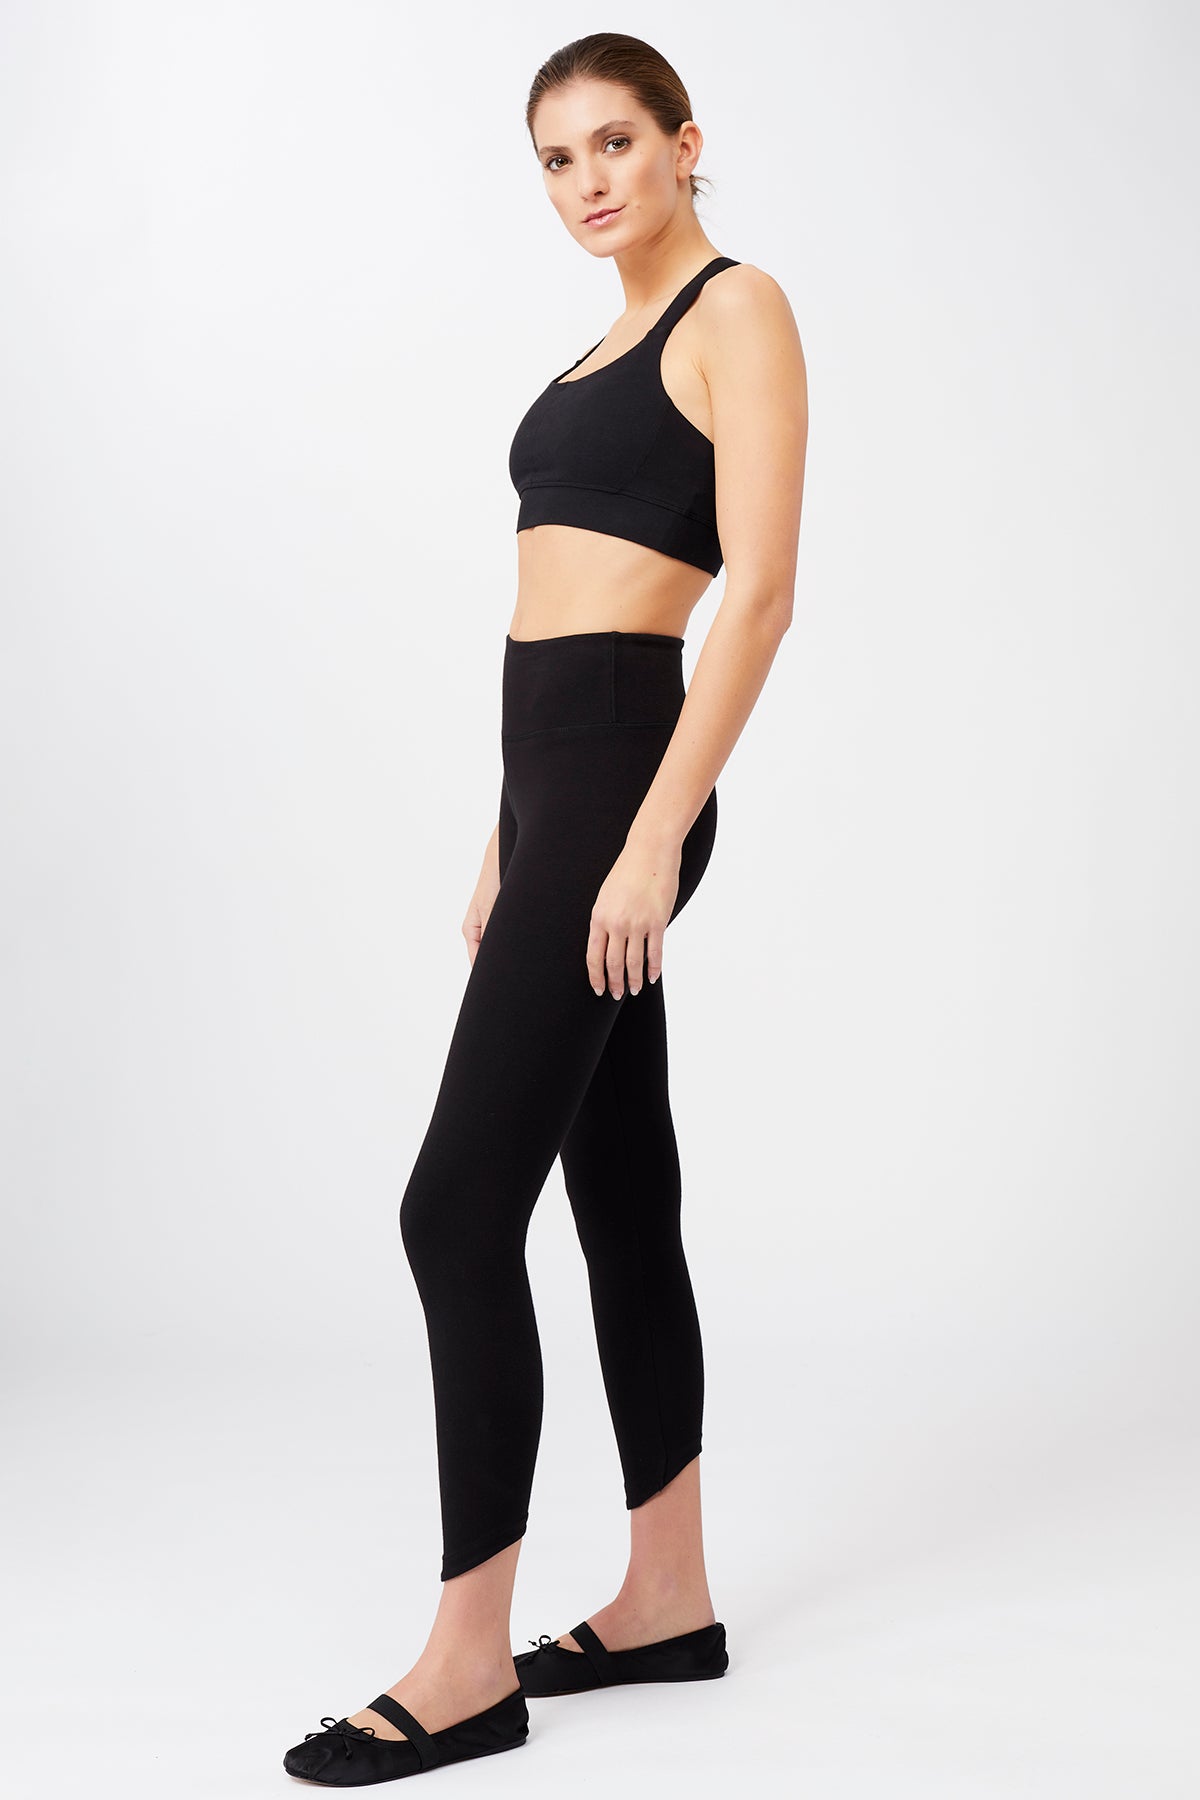 Buy Yoga Clothes Online | International Society of Precision Agriculture